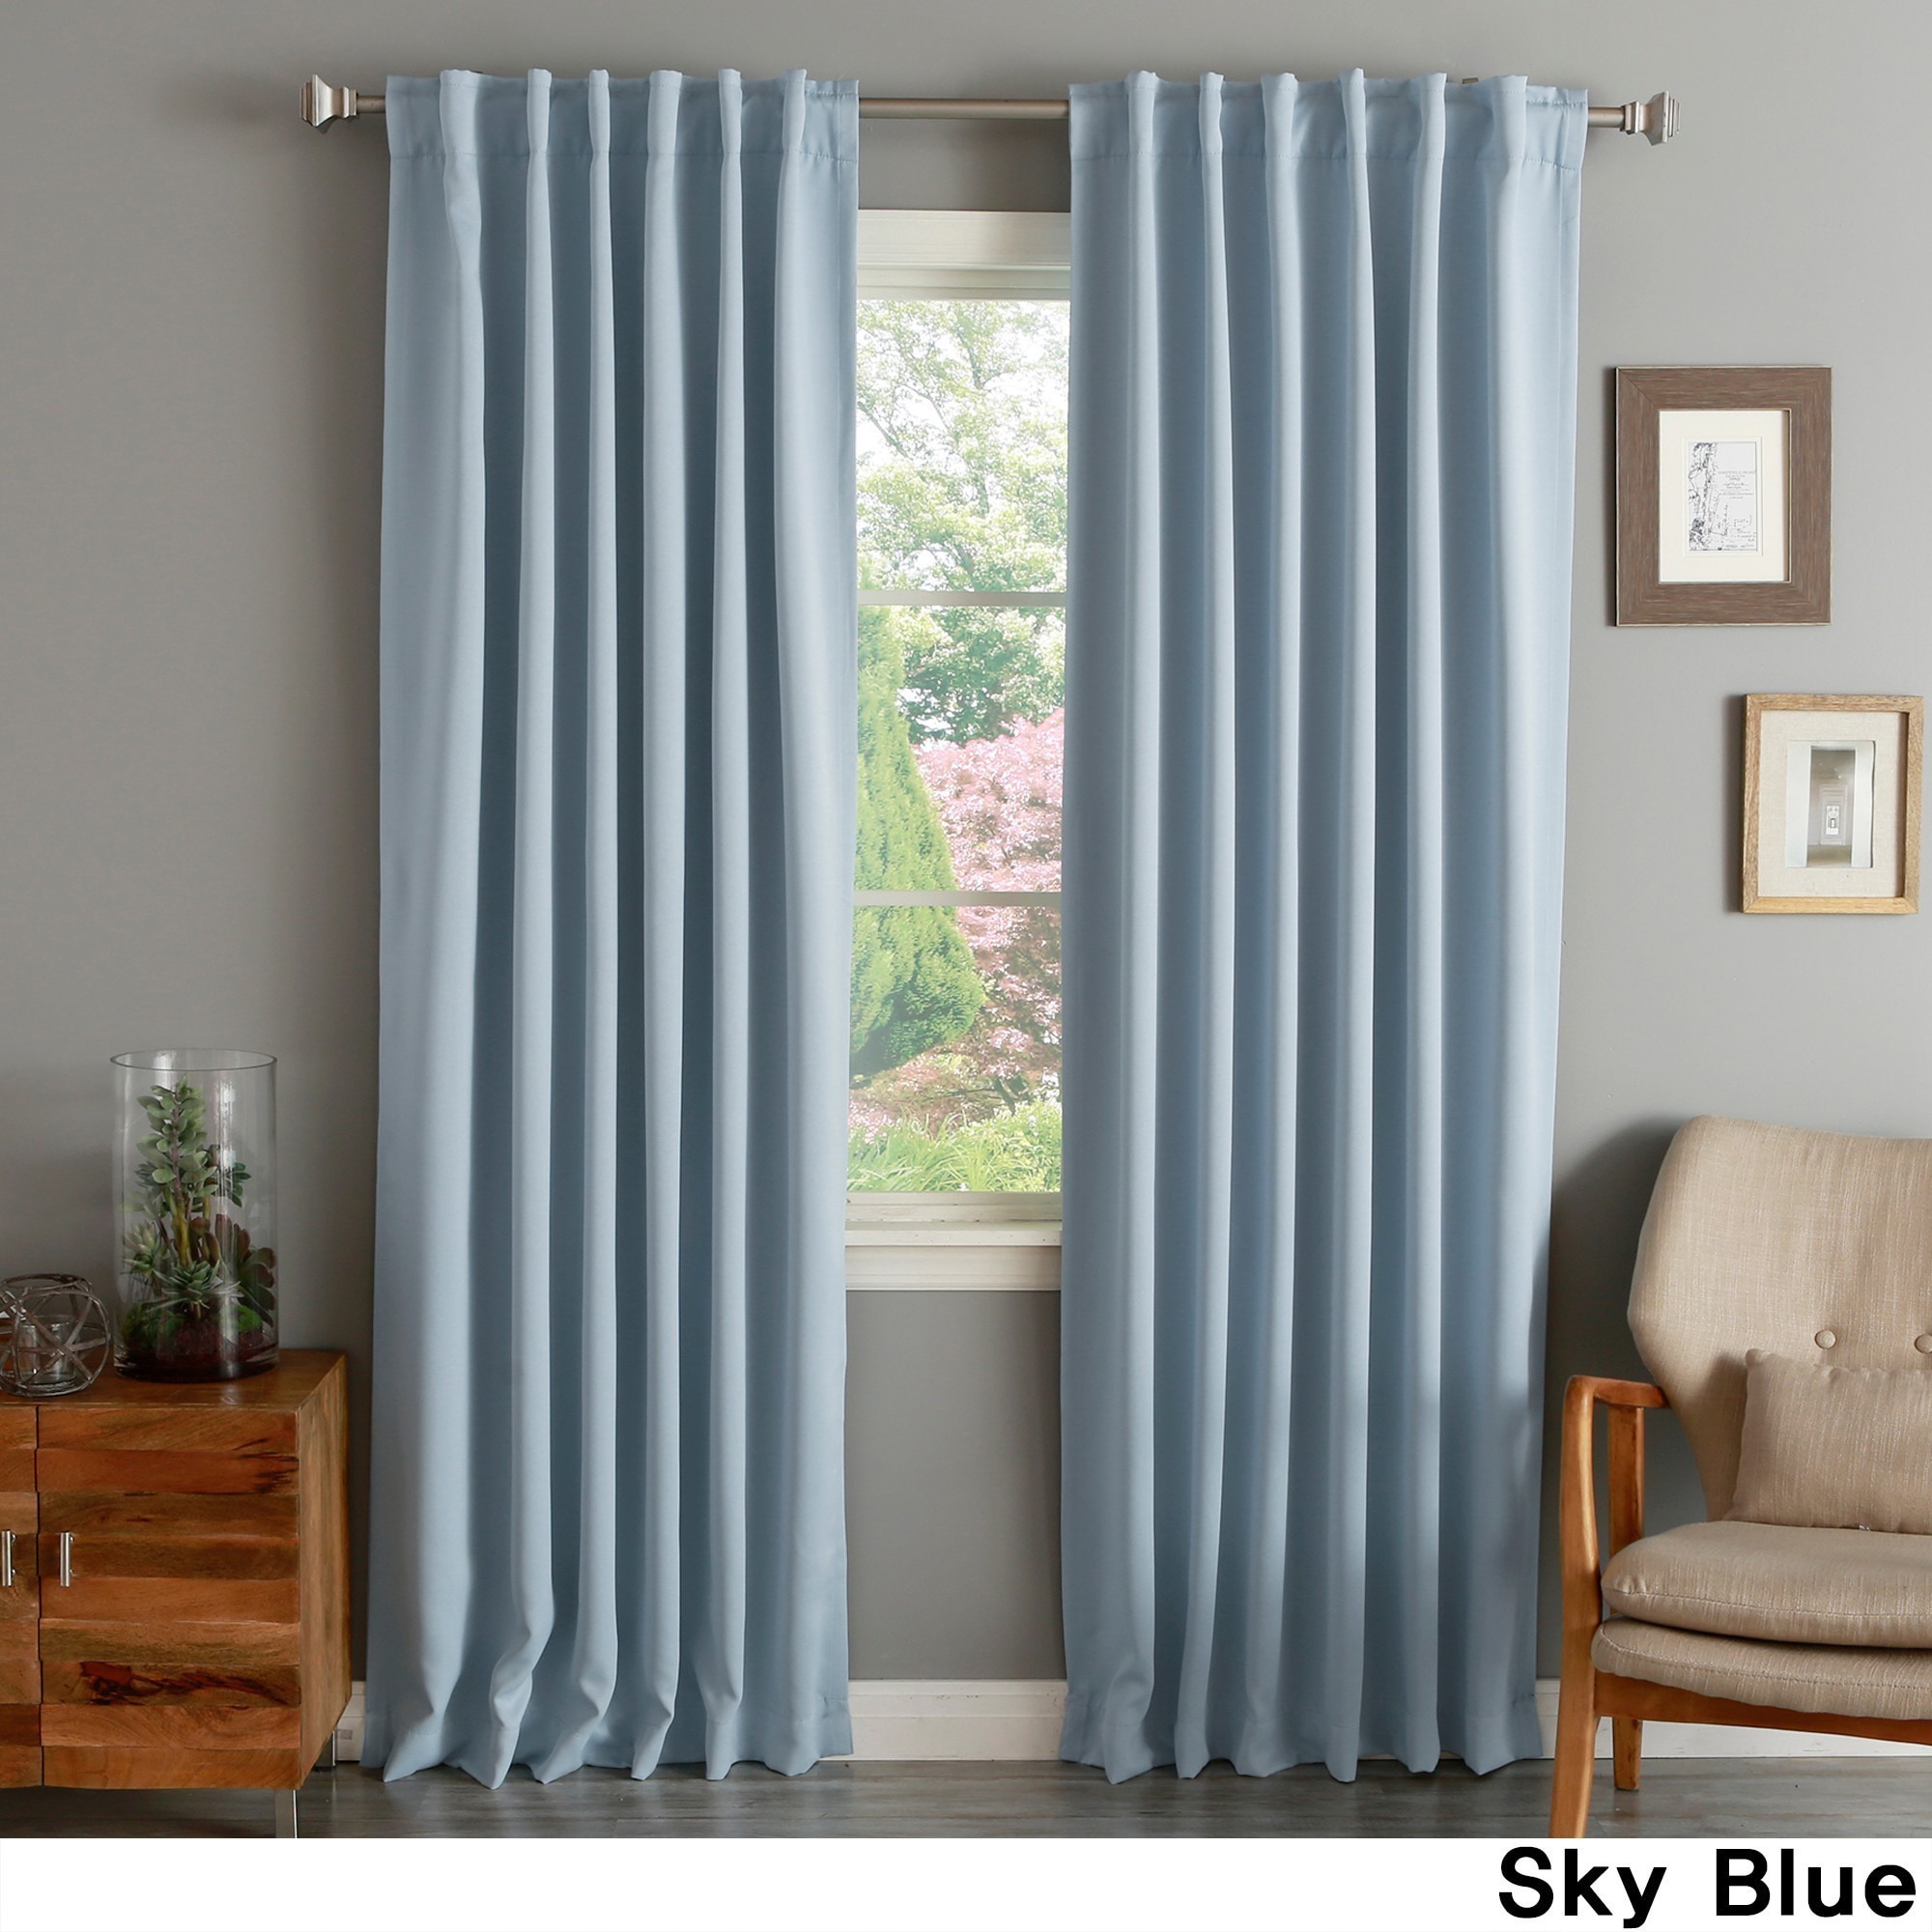 PONY DANCE Blackout Navy Curtains for Bedroom Sold as Pair Eyelet Curtains for Living Room Thermal Insulated Silver Wave Line Foil Printed Window Curtains 52 x 84 Inch